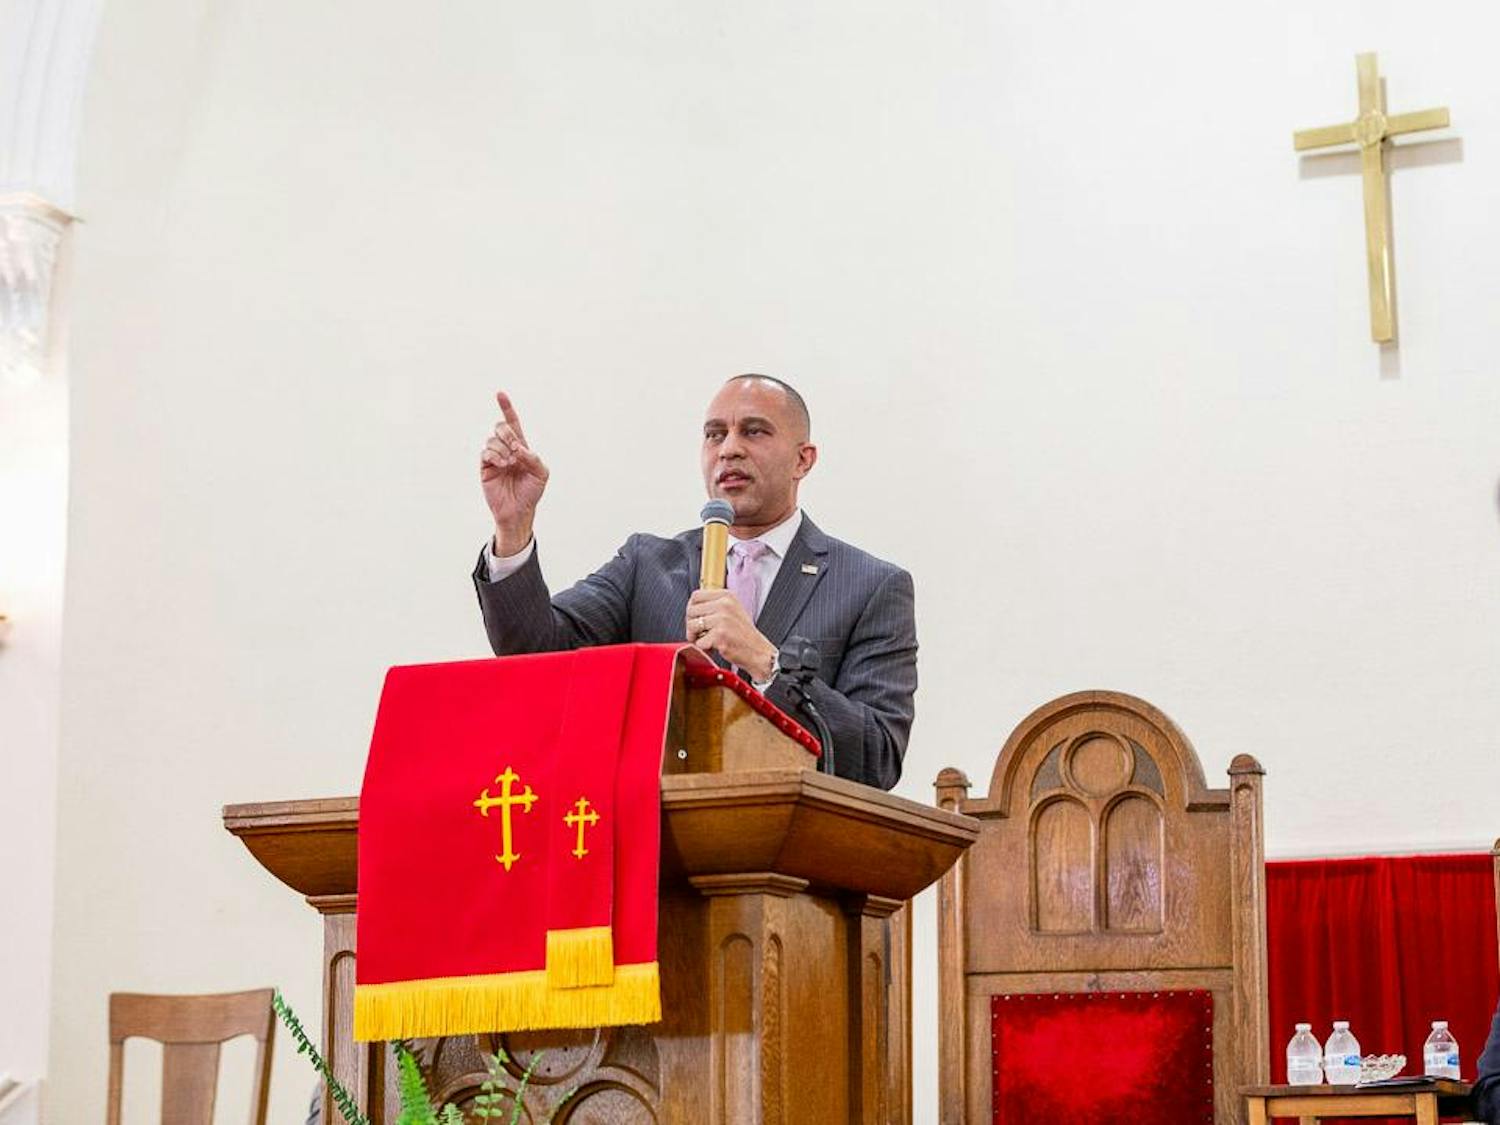 Honorable Hakeem Jeffries, the House Democratic leader for the U.S. House of Representatives, gives the keynote speech during the Martin Luther King Jr. Statewide Prayer Service at Zion Baptist Church in Columbia, SC on Jan. 15, 2024. Representative Jeffries discussed Dr. King’s legacy and the work that needs to be done to work toward “Dr. King's dream of a truly colorblind society.”